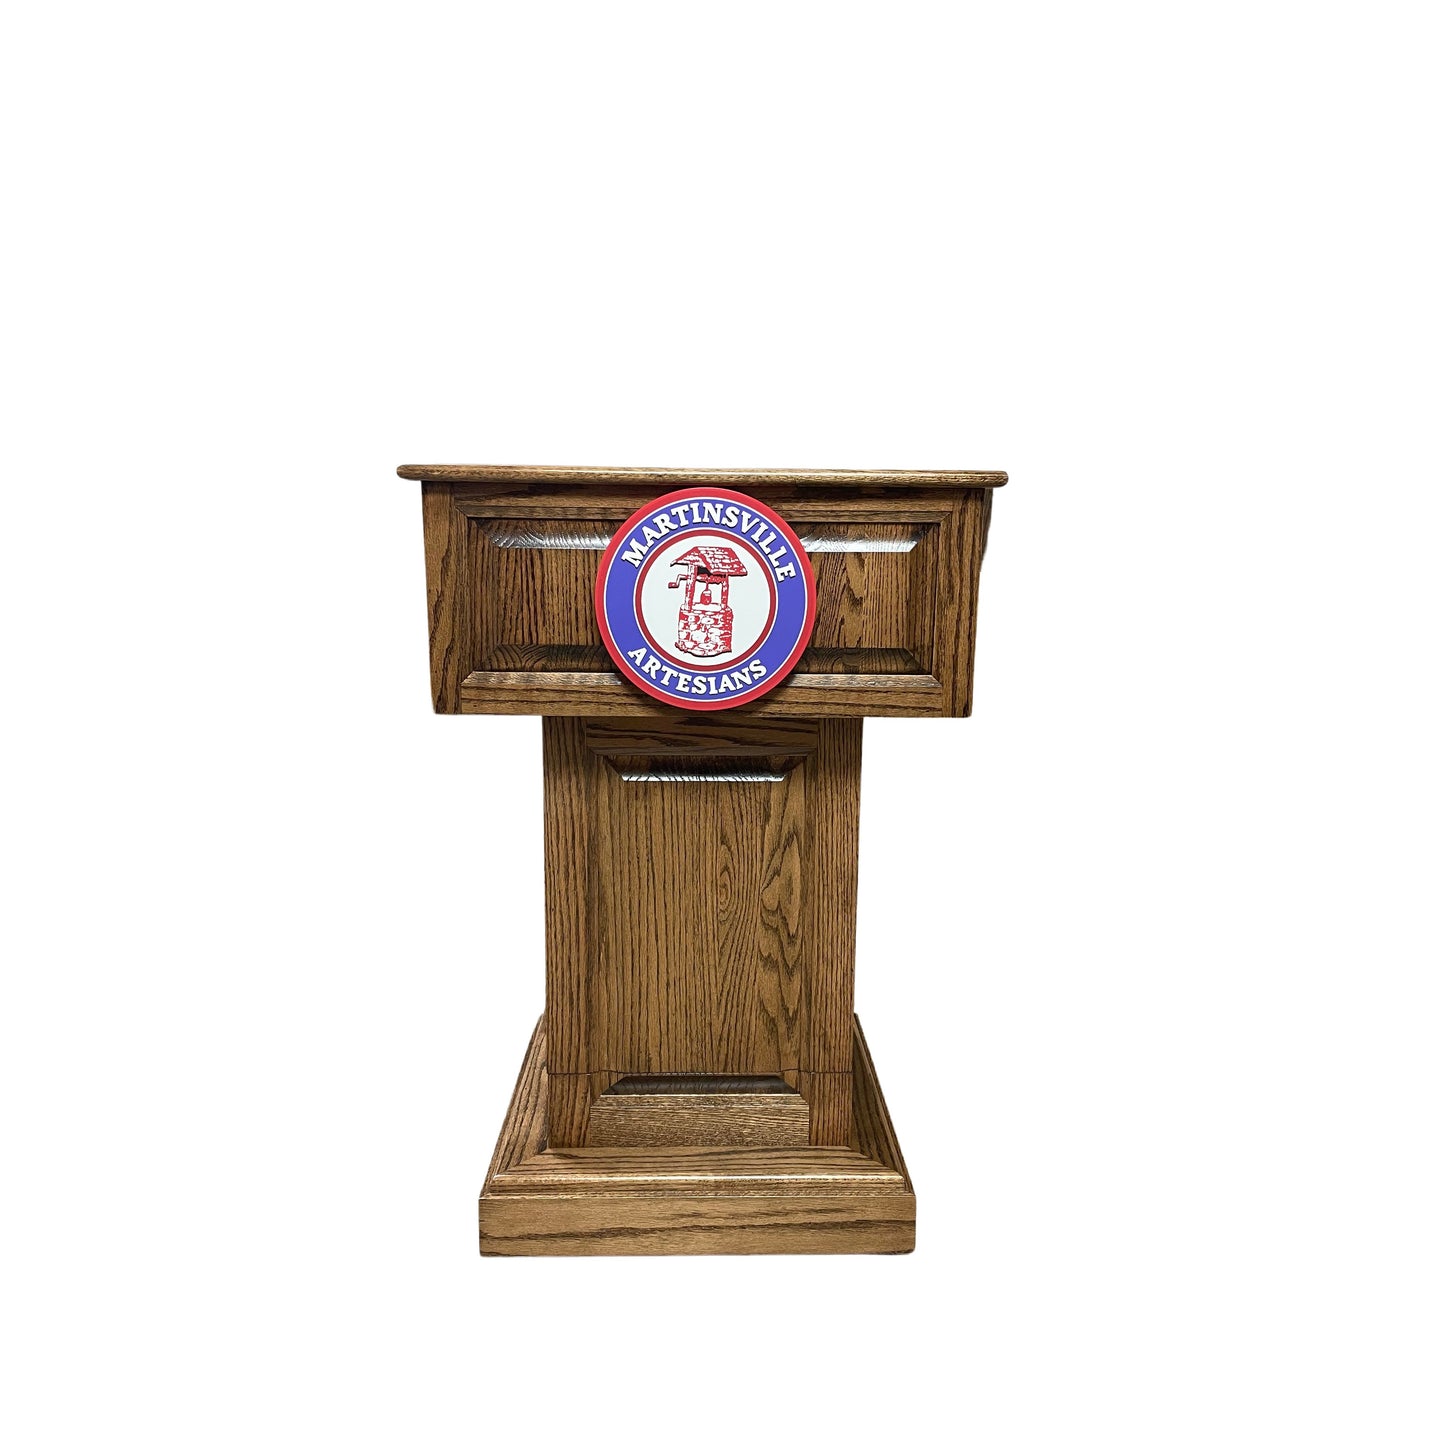 Adjustable Height Counselor Lift Wood Lectern